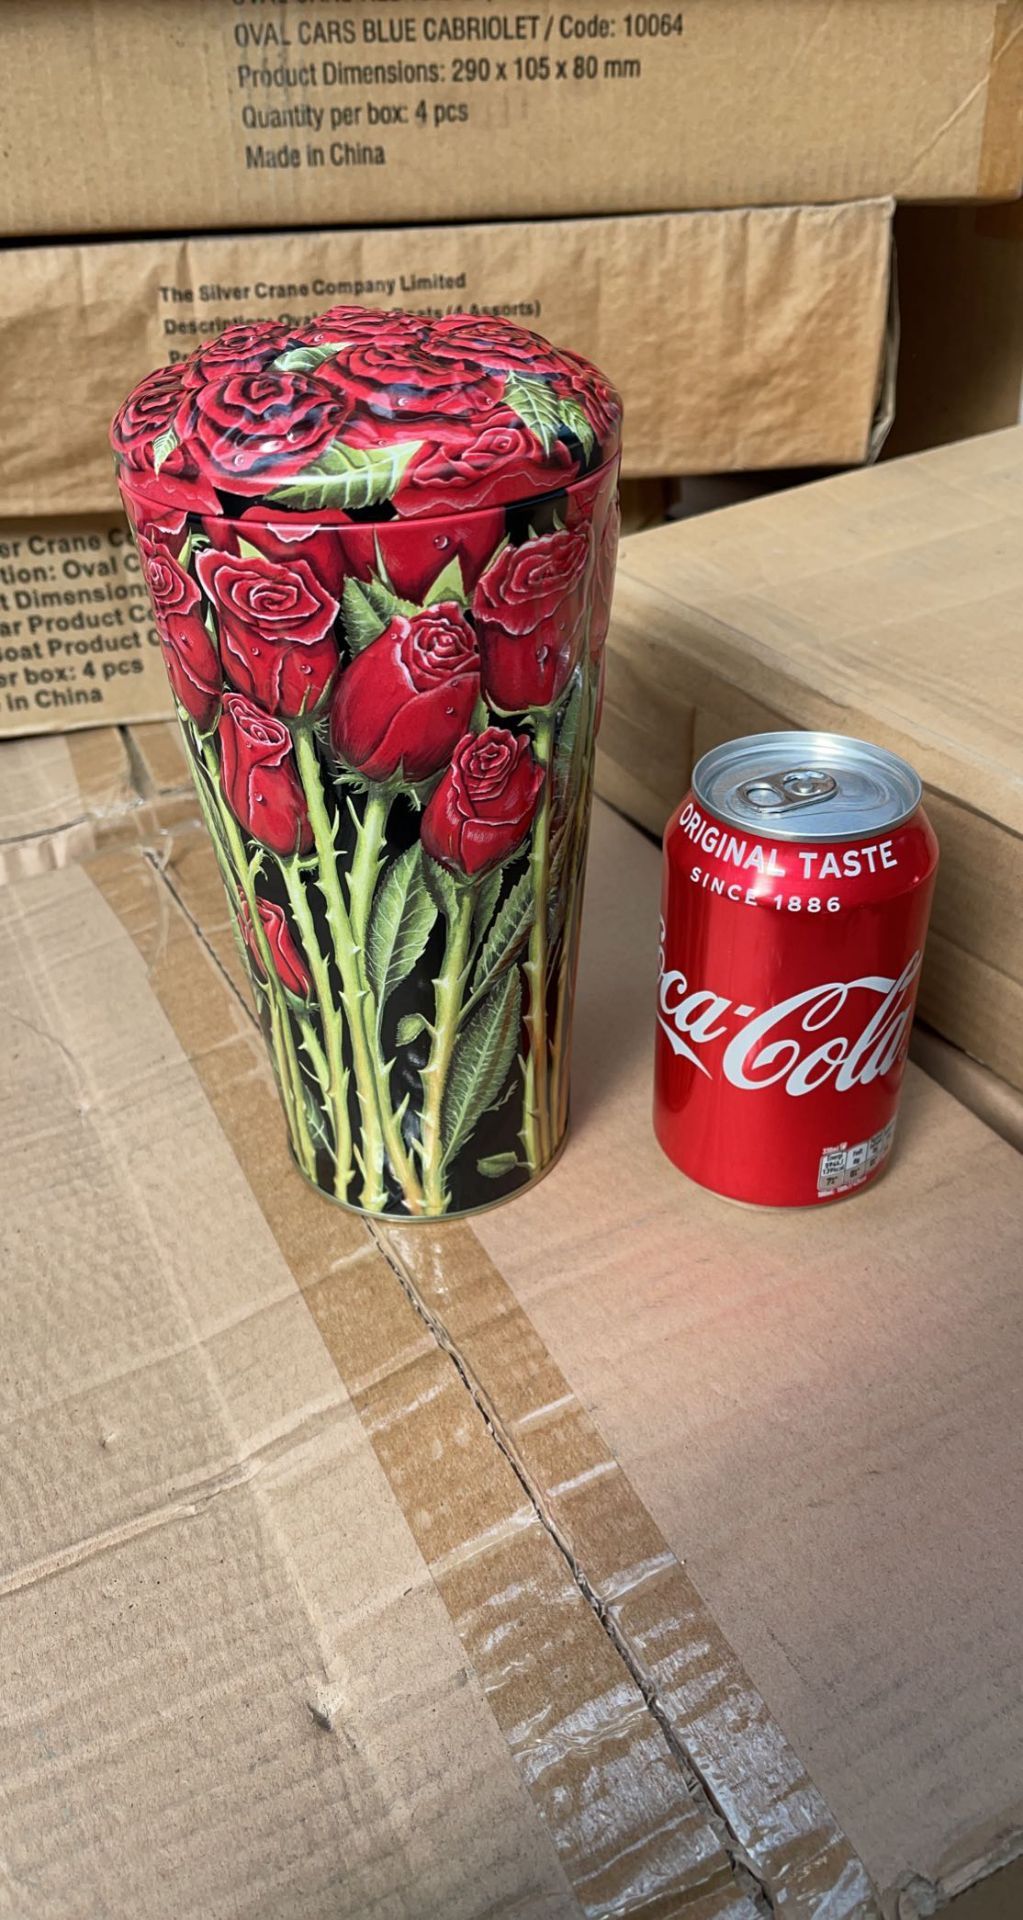 1 x Pallet containing THE SILVER CRANE CO tins - Large Red Rose Flower Vase Tin 29 x 12